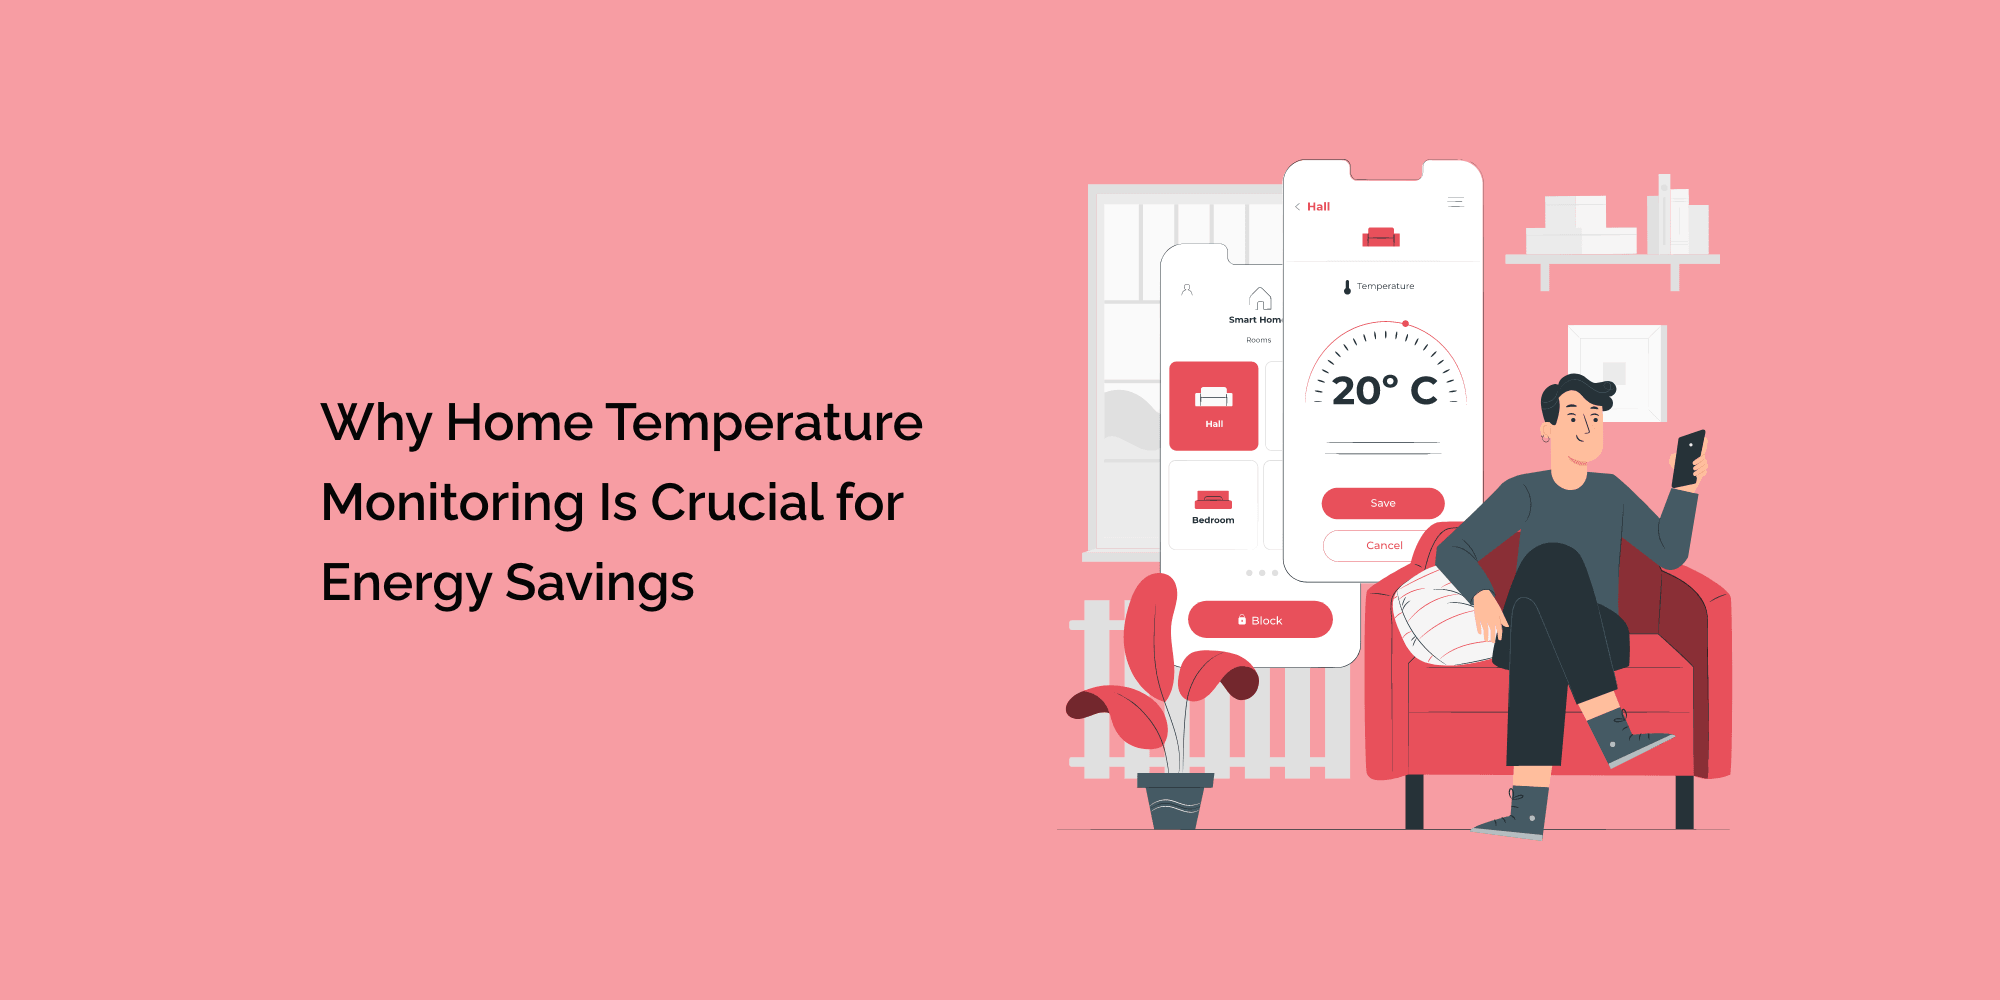 Why Home Temperature Monitoring Is Crucial for Energy Savings